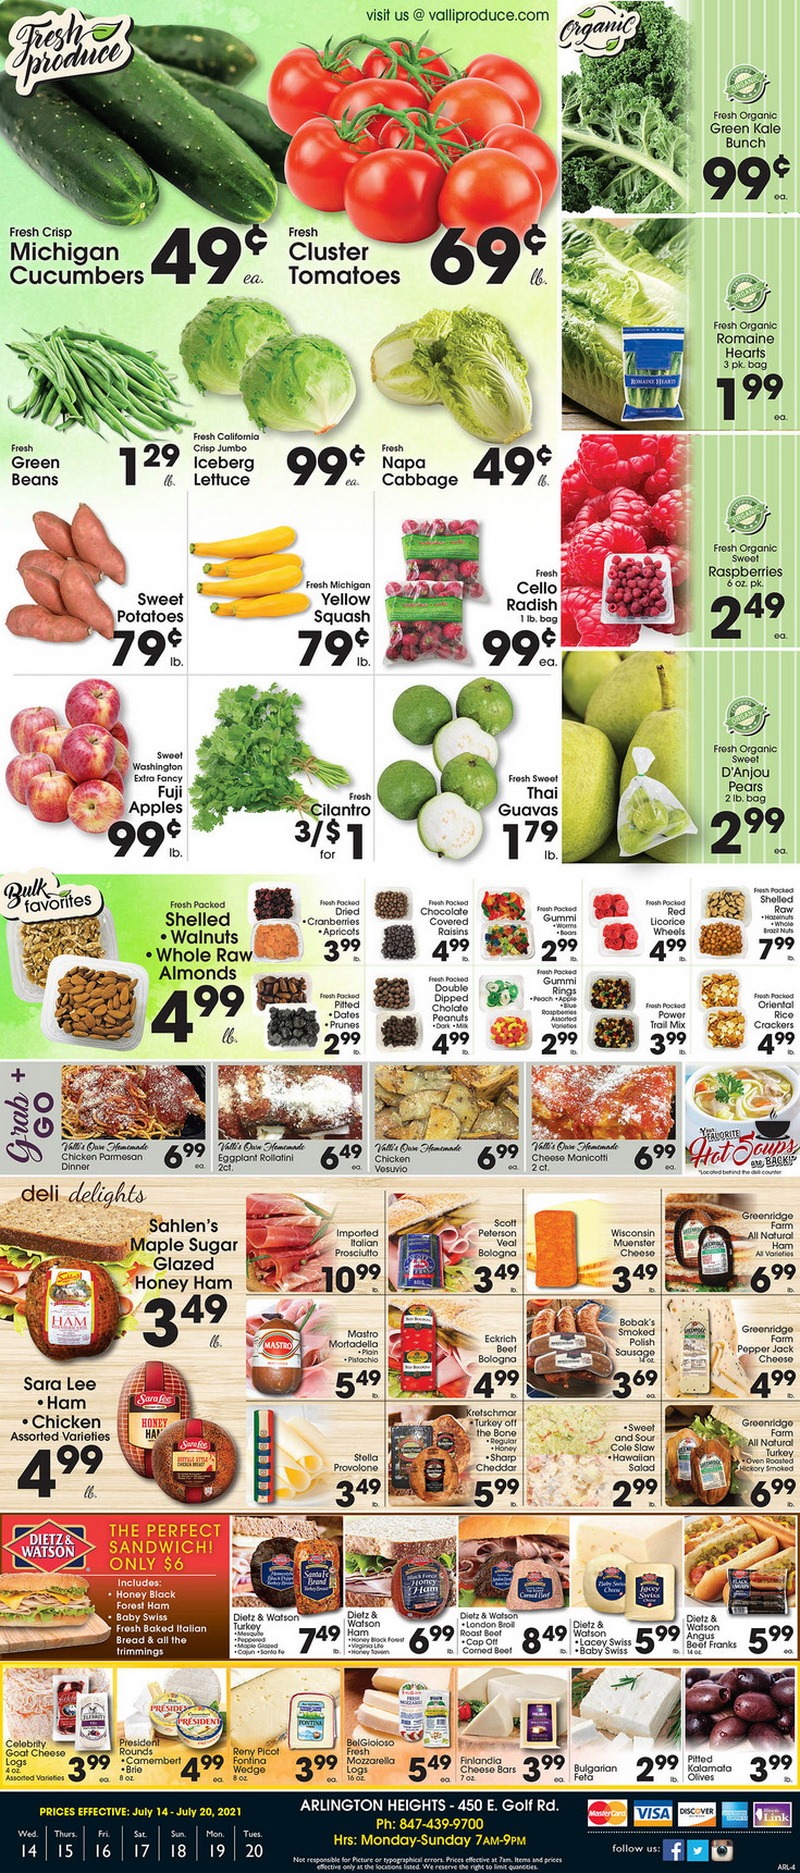 Valli Produce Weekly Ad July 14 – July 20, 2021